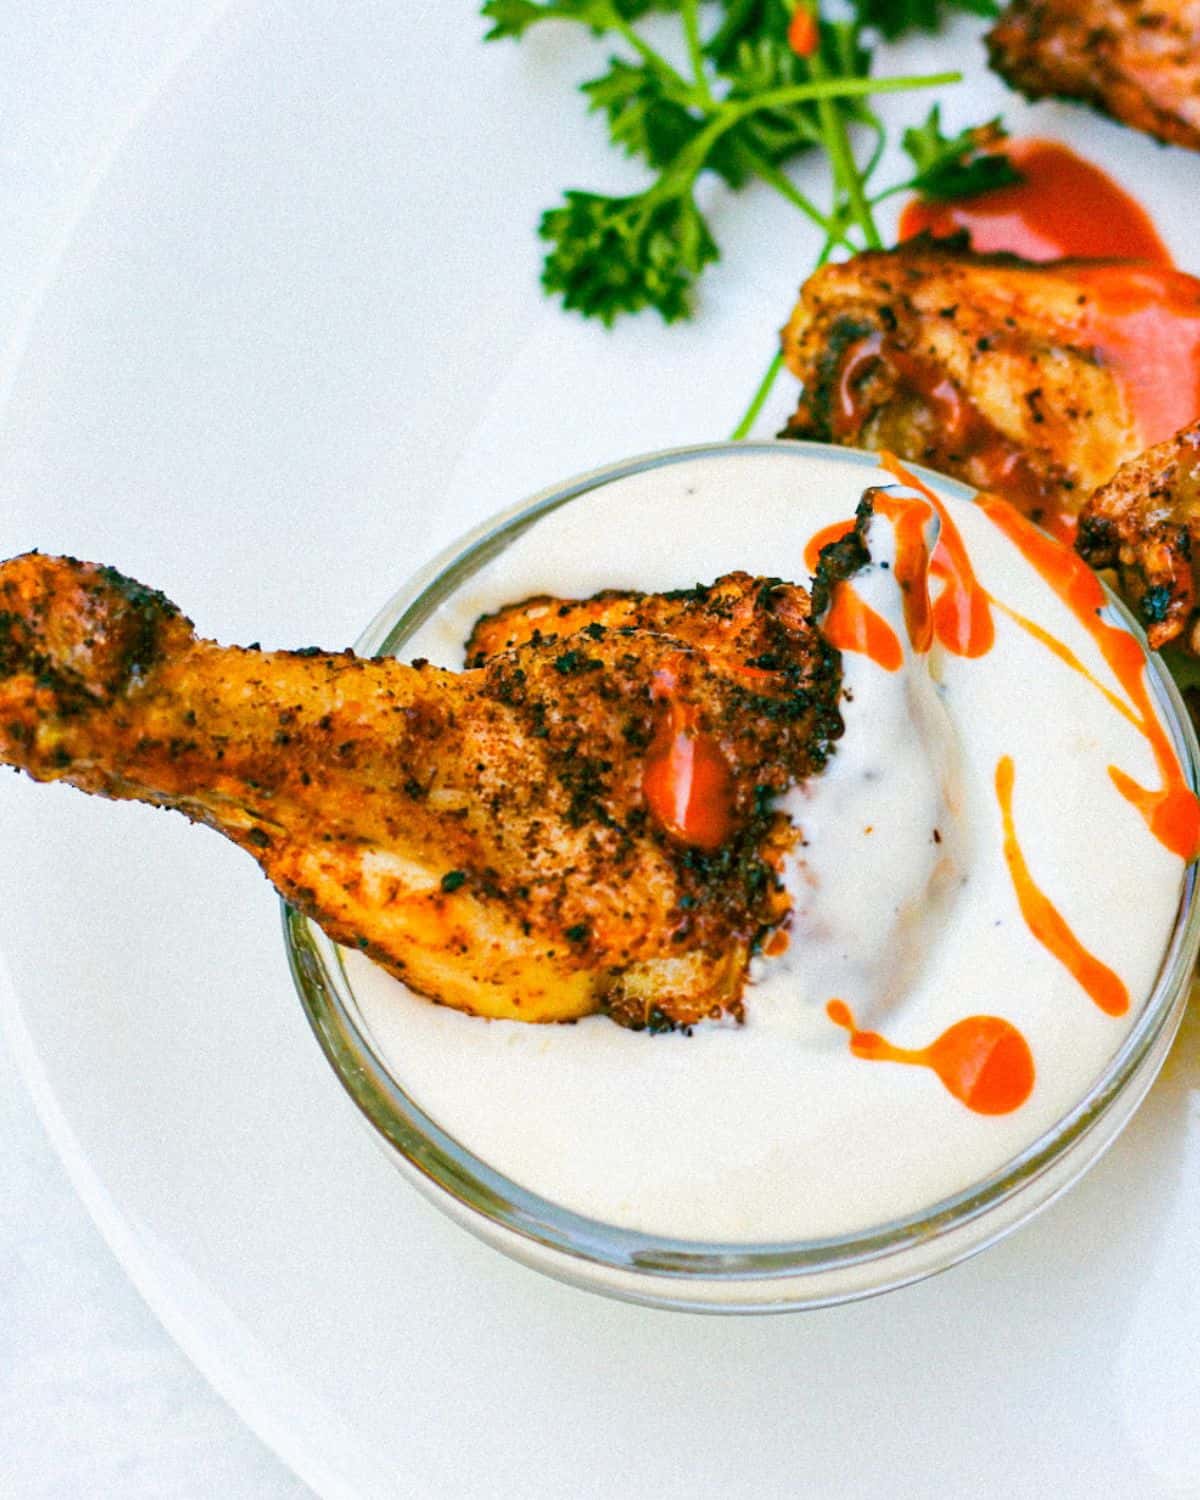 Cooked chicken drumette drizzled with red sauce and being dipped in a white creamy dressing.